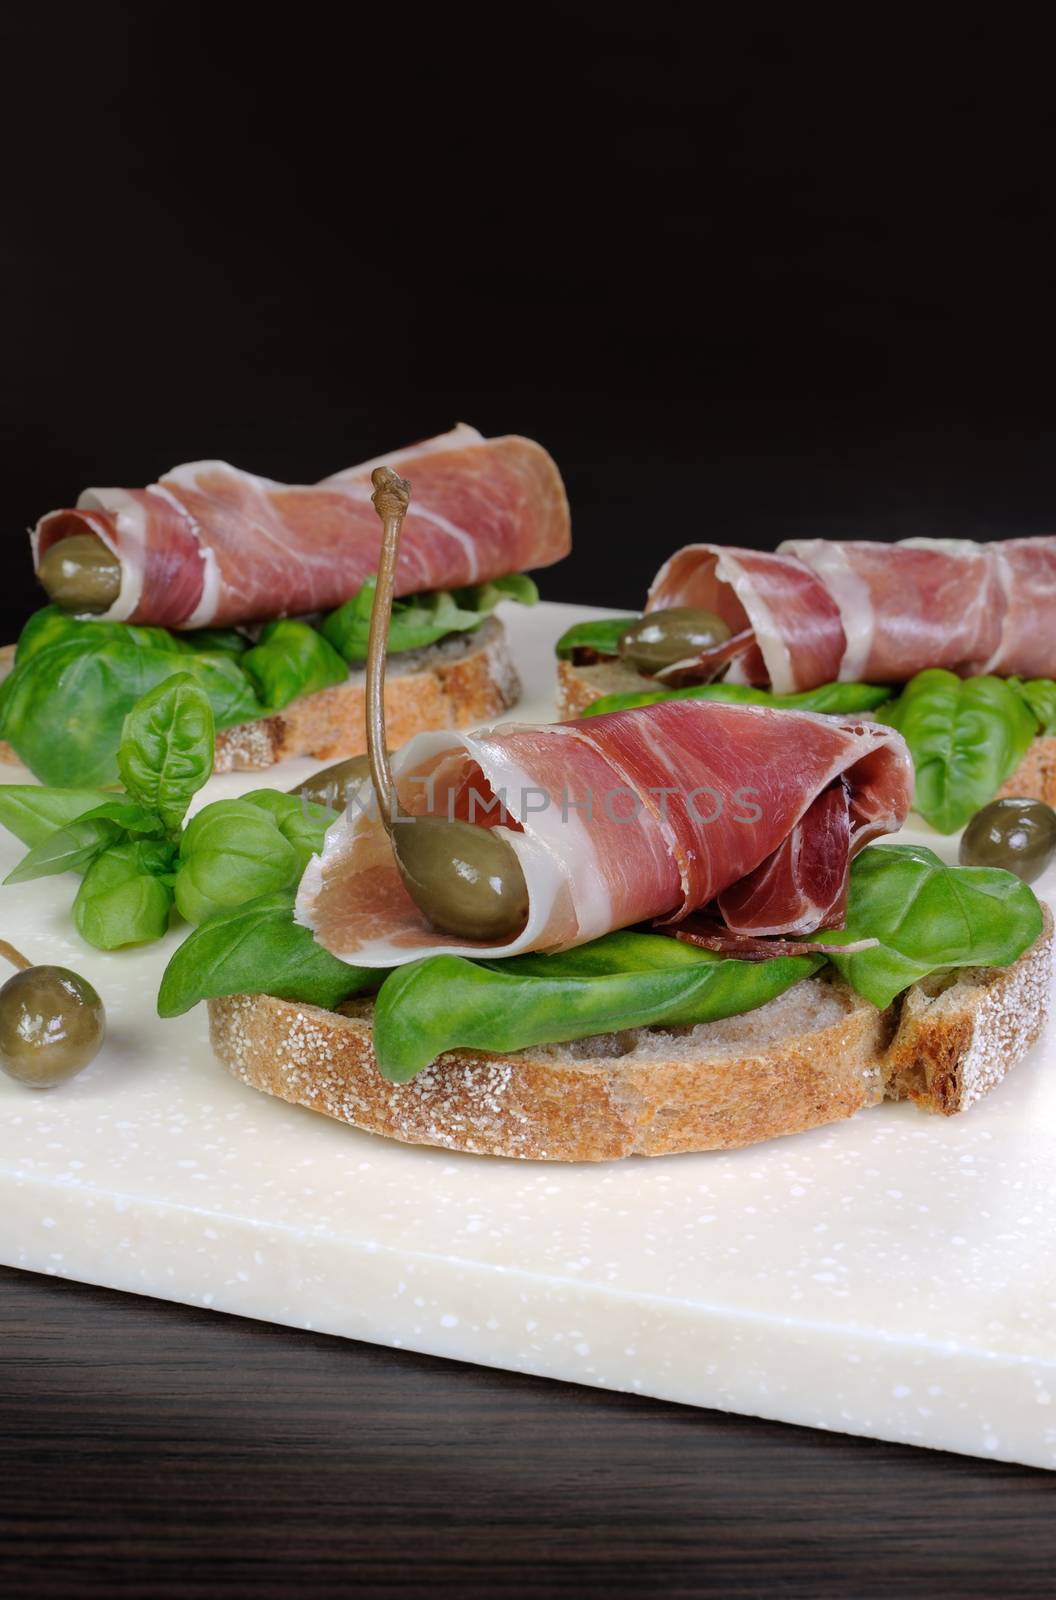 Sandwich of jamon  by Apolonia